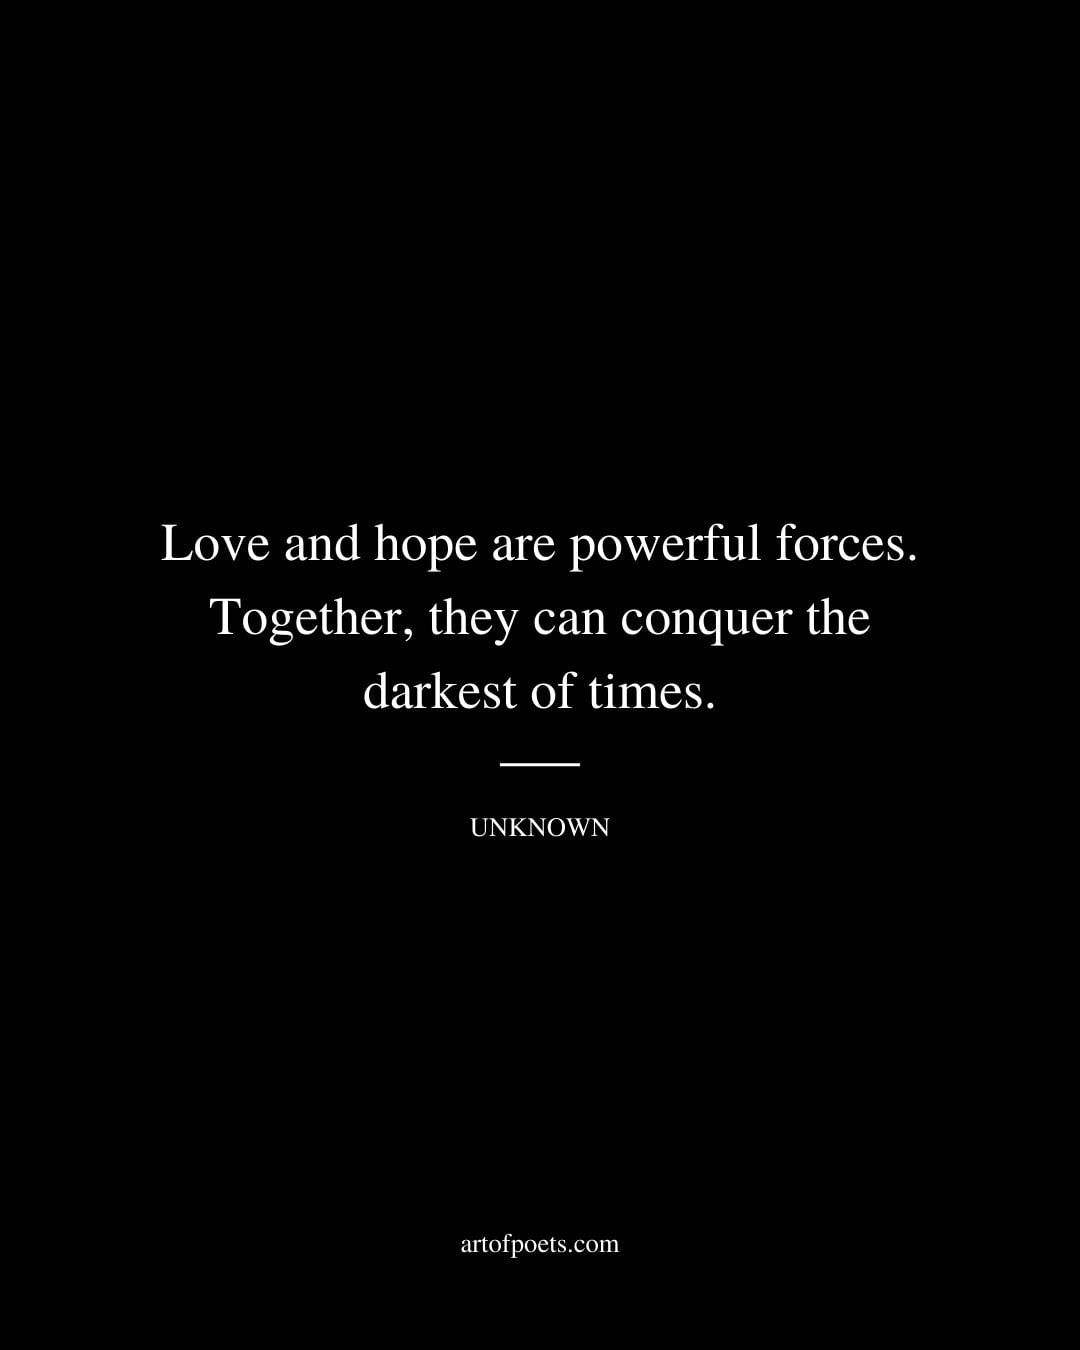 Love and hope are powerful forces. Together they can conquer the darkest of times. Unknown